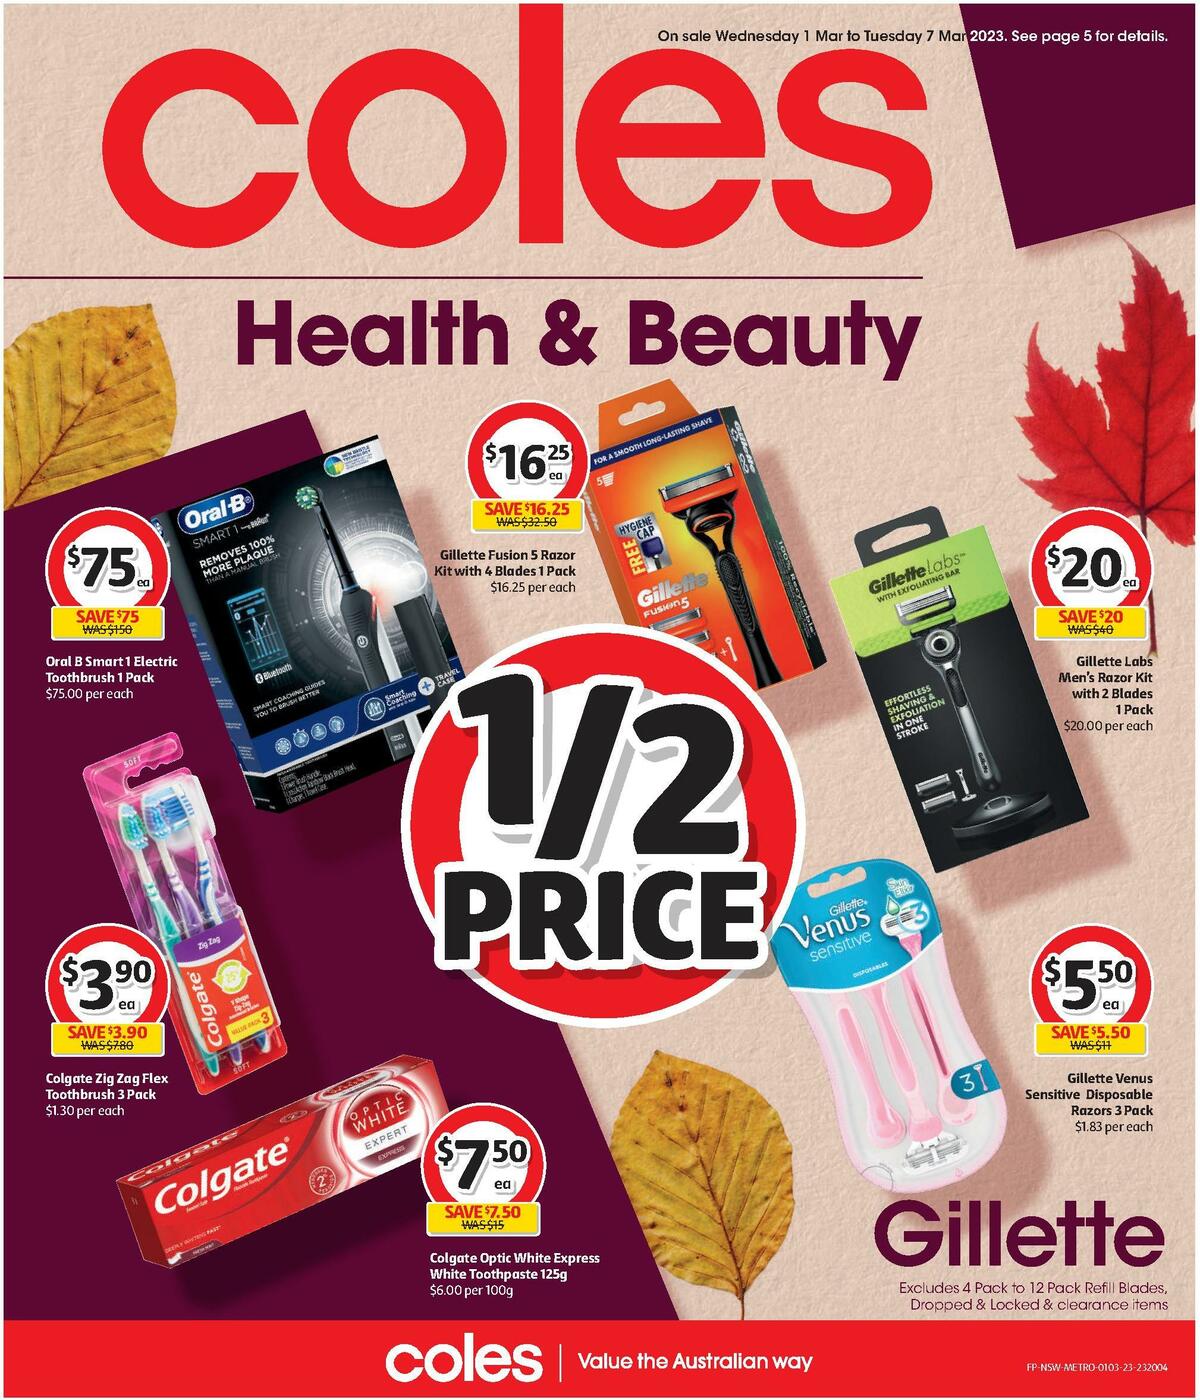 Coles Health & Beauty NSW METRO Catalogues from 1 March